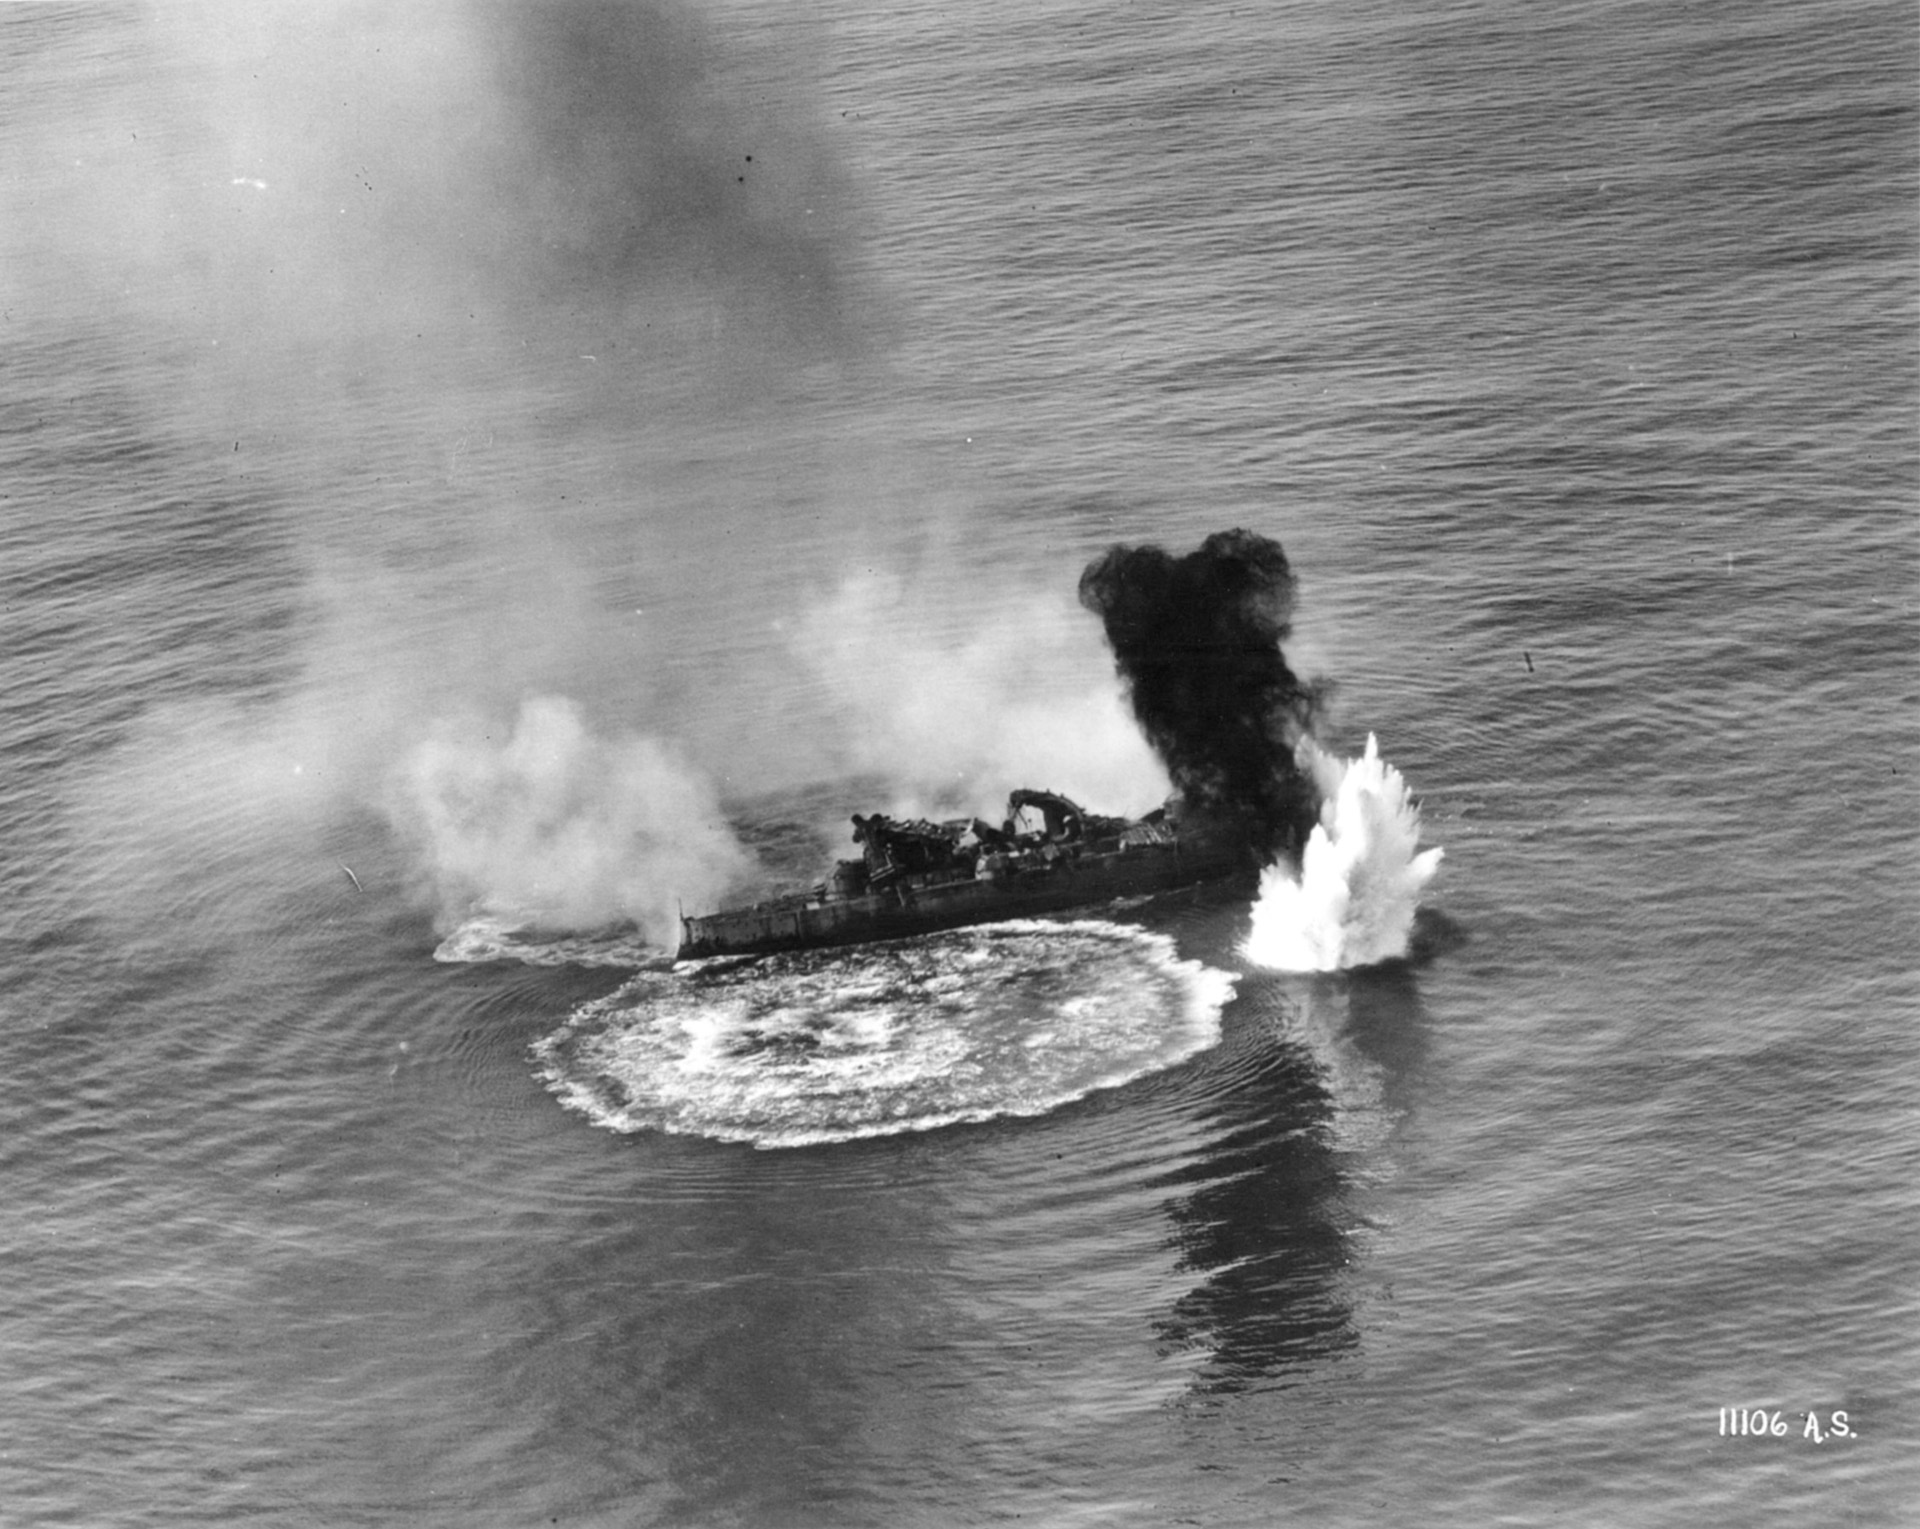 During an aerial bombing exercise, the obsolete battleship USS Virginia takes a direct hit.